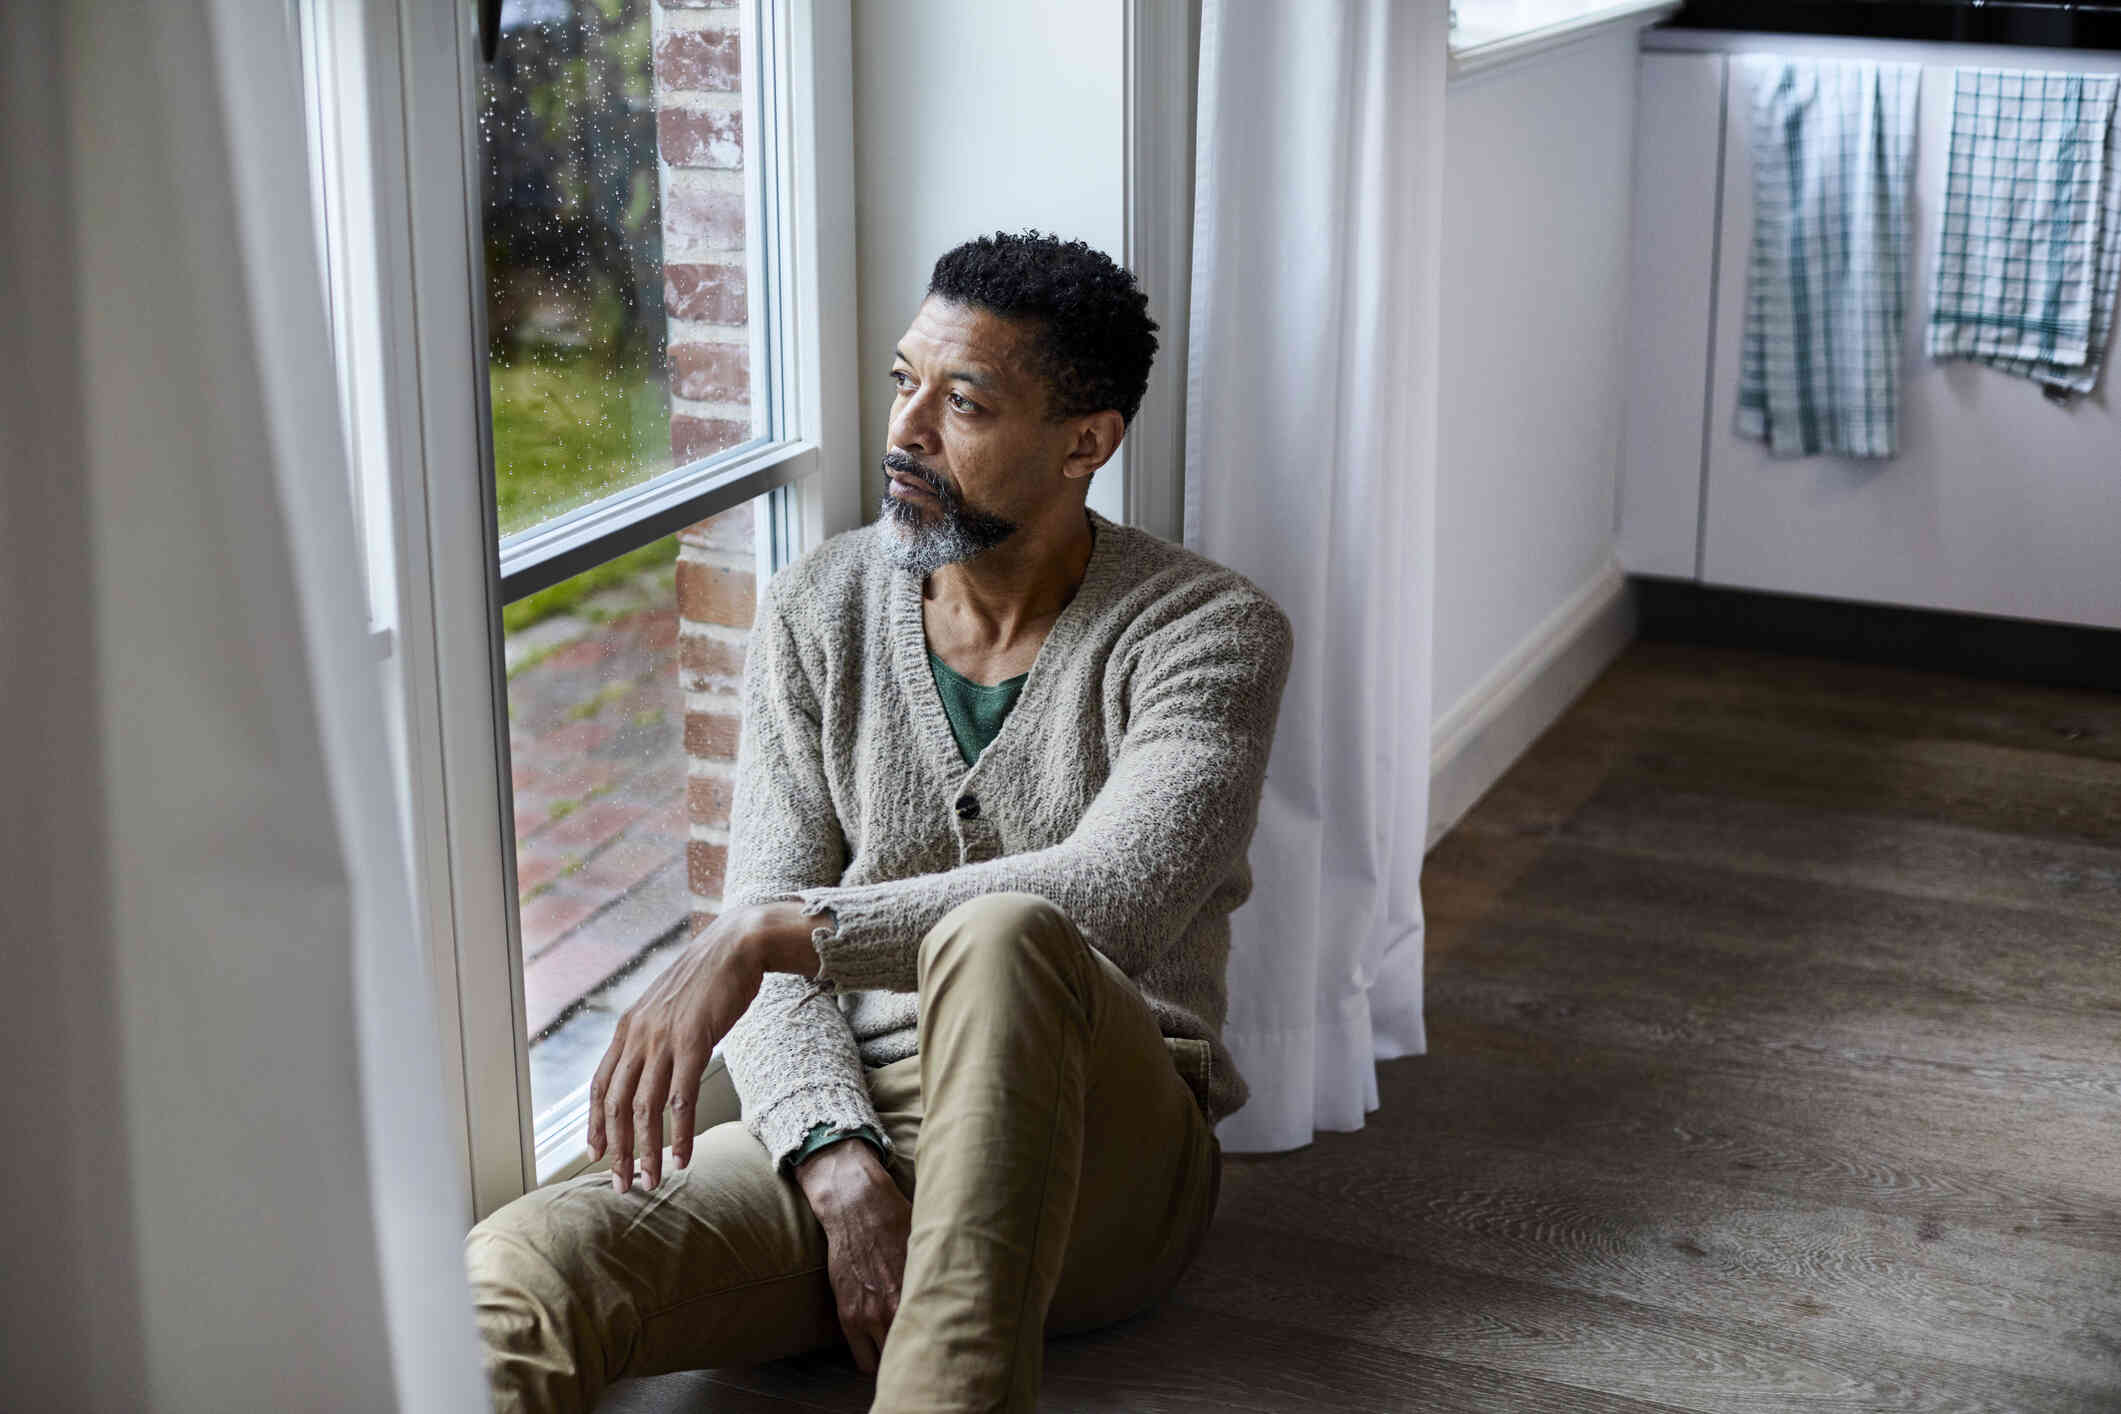 A mature man in a grey sweater sits on the floor near a floor length window in his home and glances out of the window with a worried expression on a rainy day.